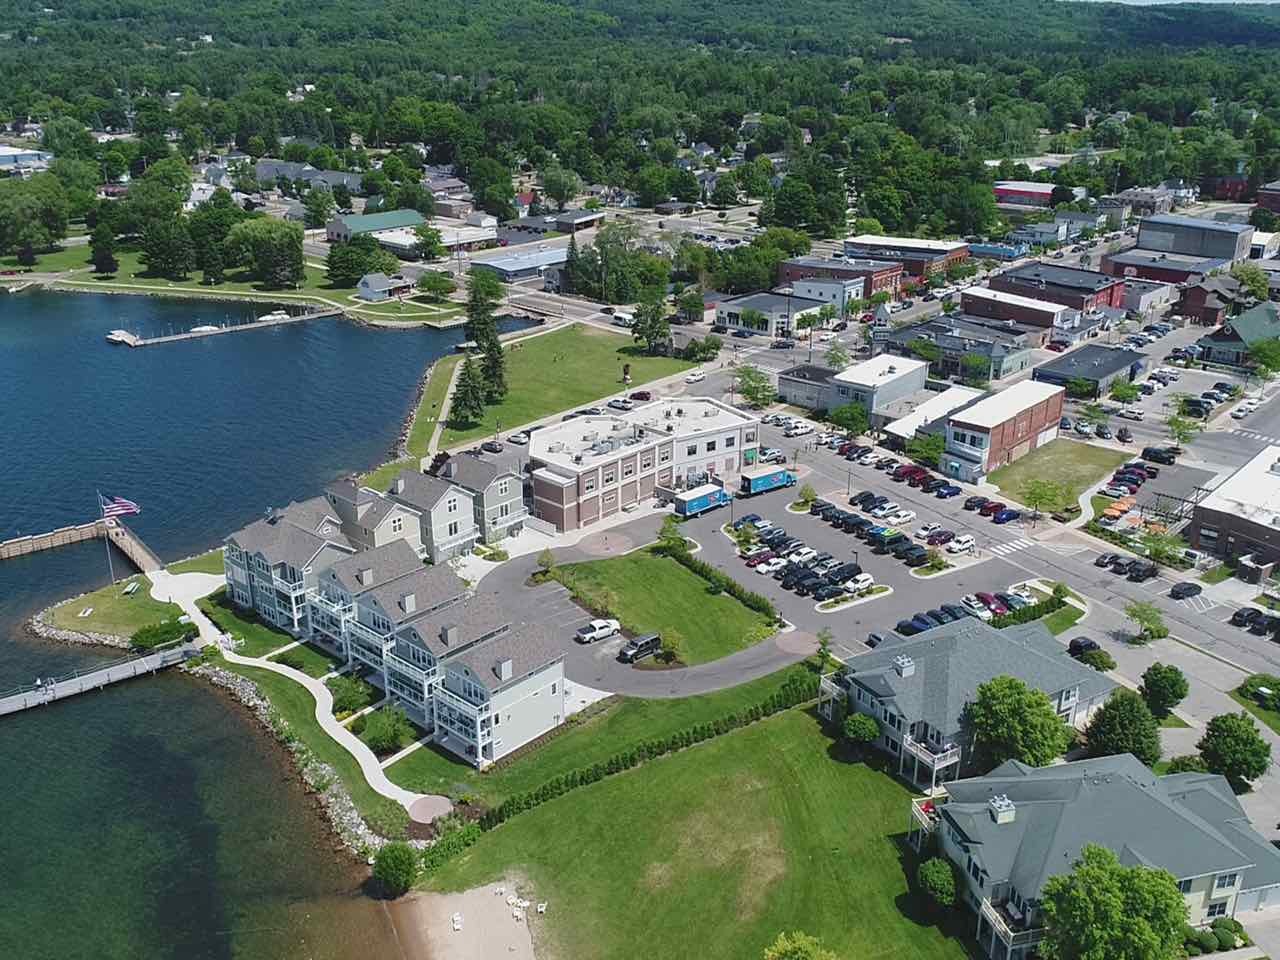 Resort Cottages Condominiums on Lake Charlevoix in downtown Boyne City, Michigan